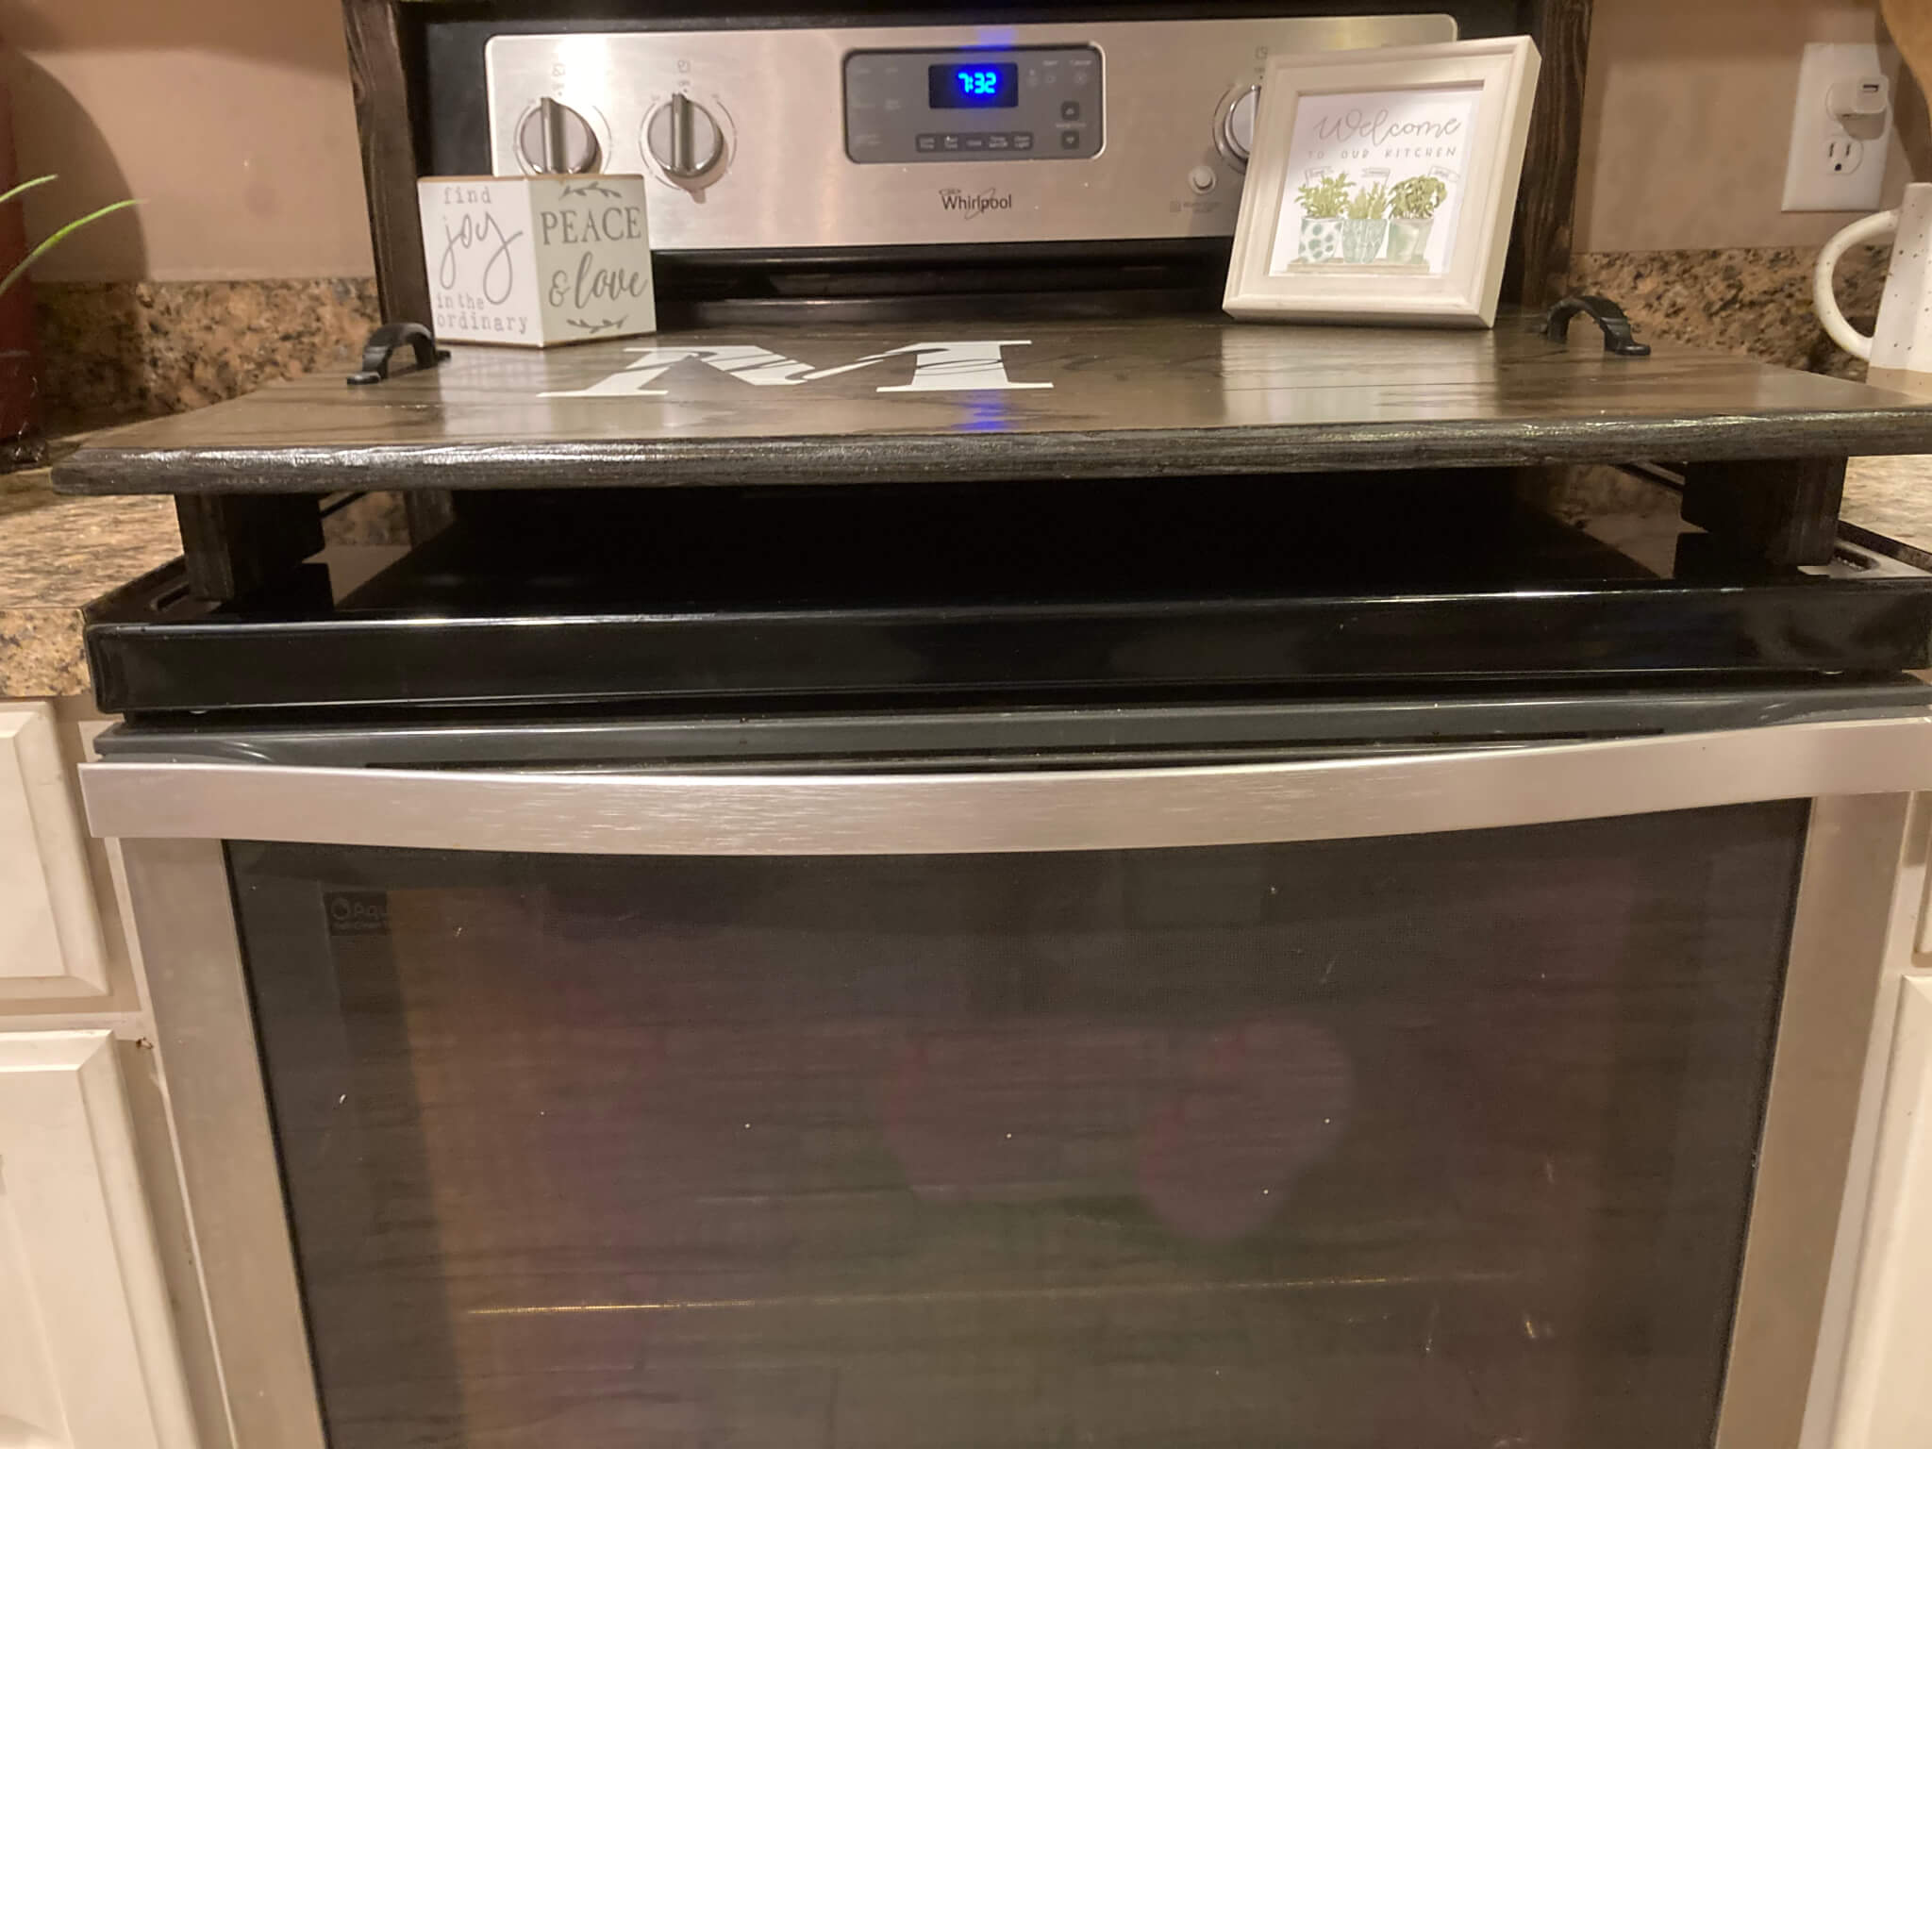 This is a view showing the raise of the Farm house stove top cover. It shows that the board has wooden feet which lift the cover up off the surface of the  stove top. 